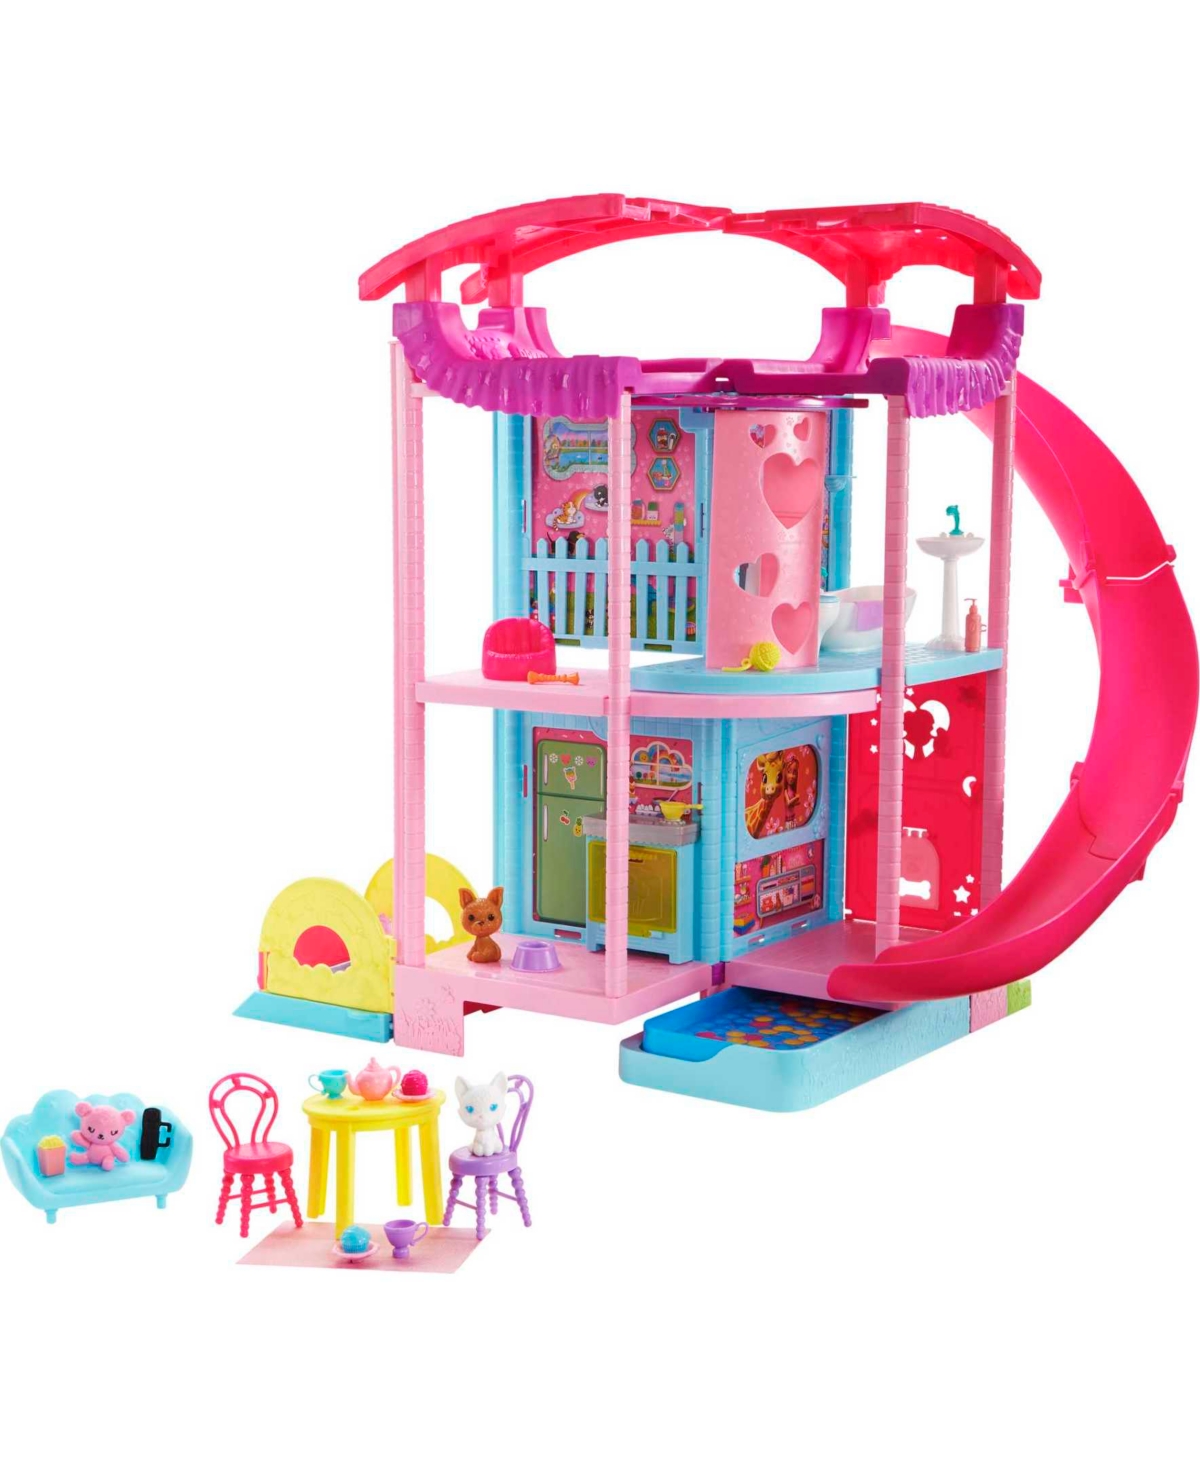 Barbie Kids' Chelsea Playhouse With Slide, Pool, Ball Pit, Pet Puppy & Kitten, Elevator, And Accessories In Multi